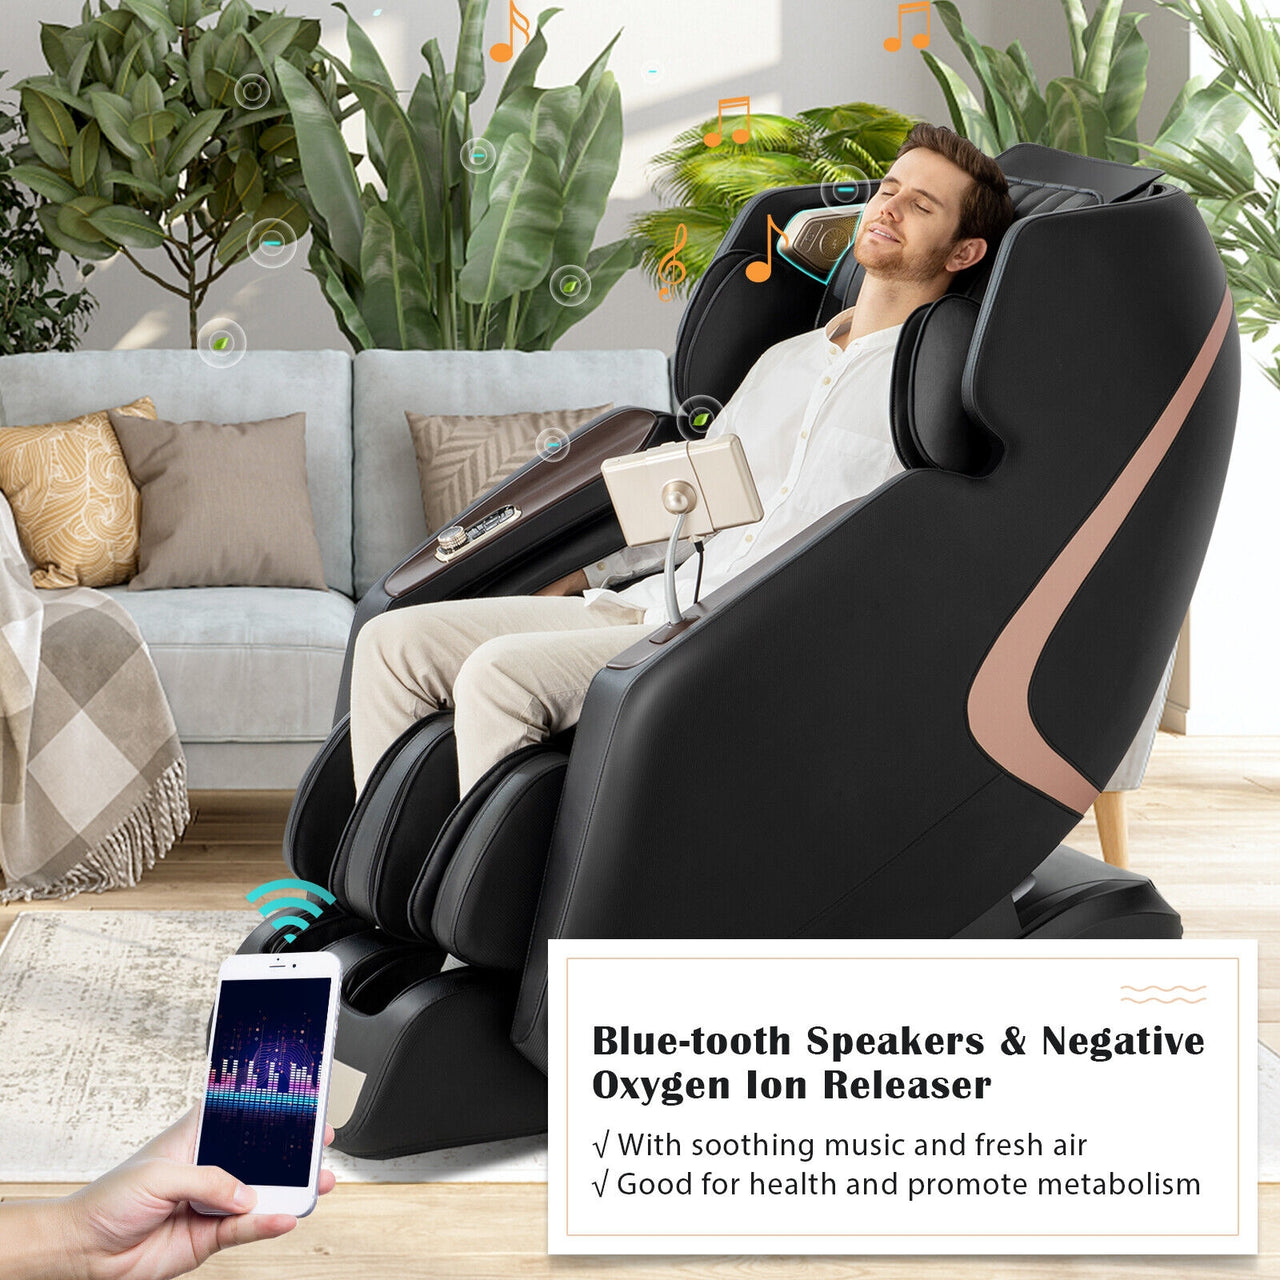 Enjoyment 13 - 3D SL-Track Full Body Zero Gravity Massage Chair with Thai Stretch - Gallery View 2 of 10